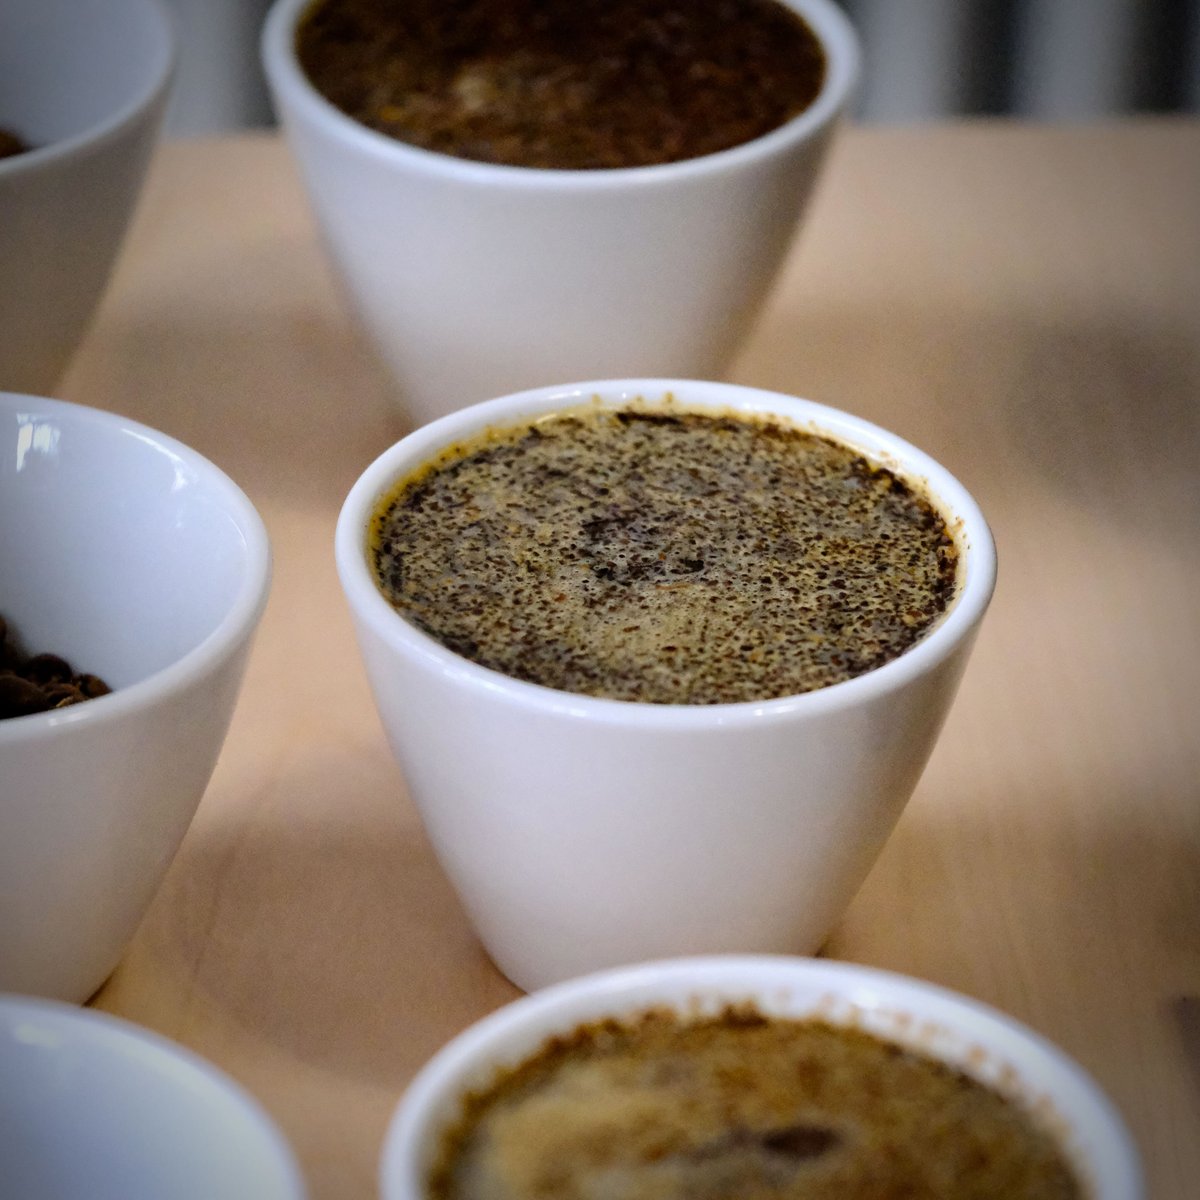 Image of Atelier cupping